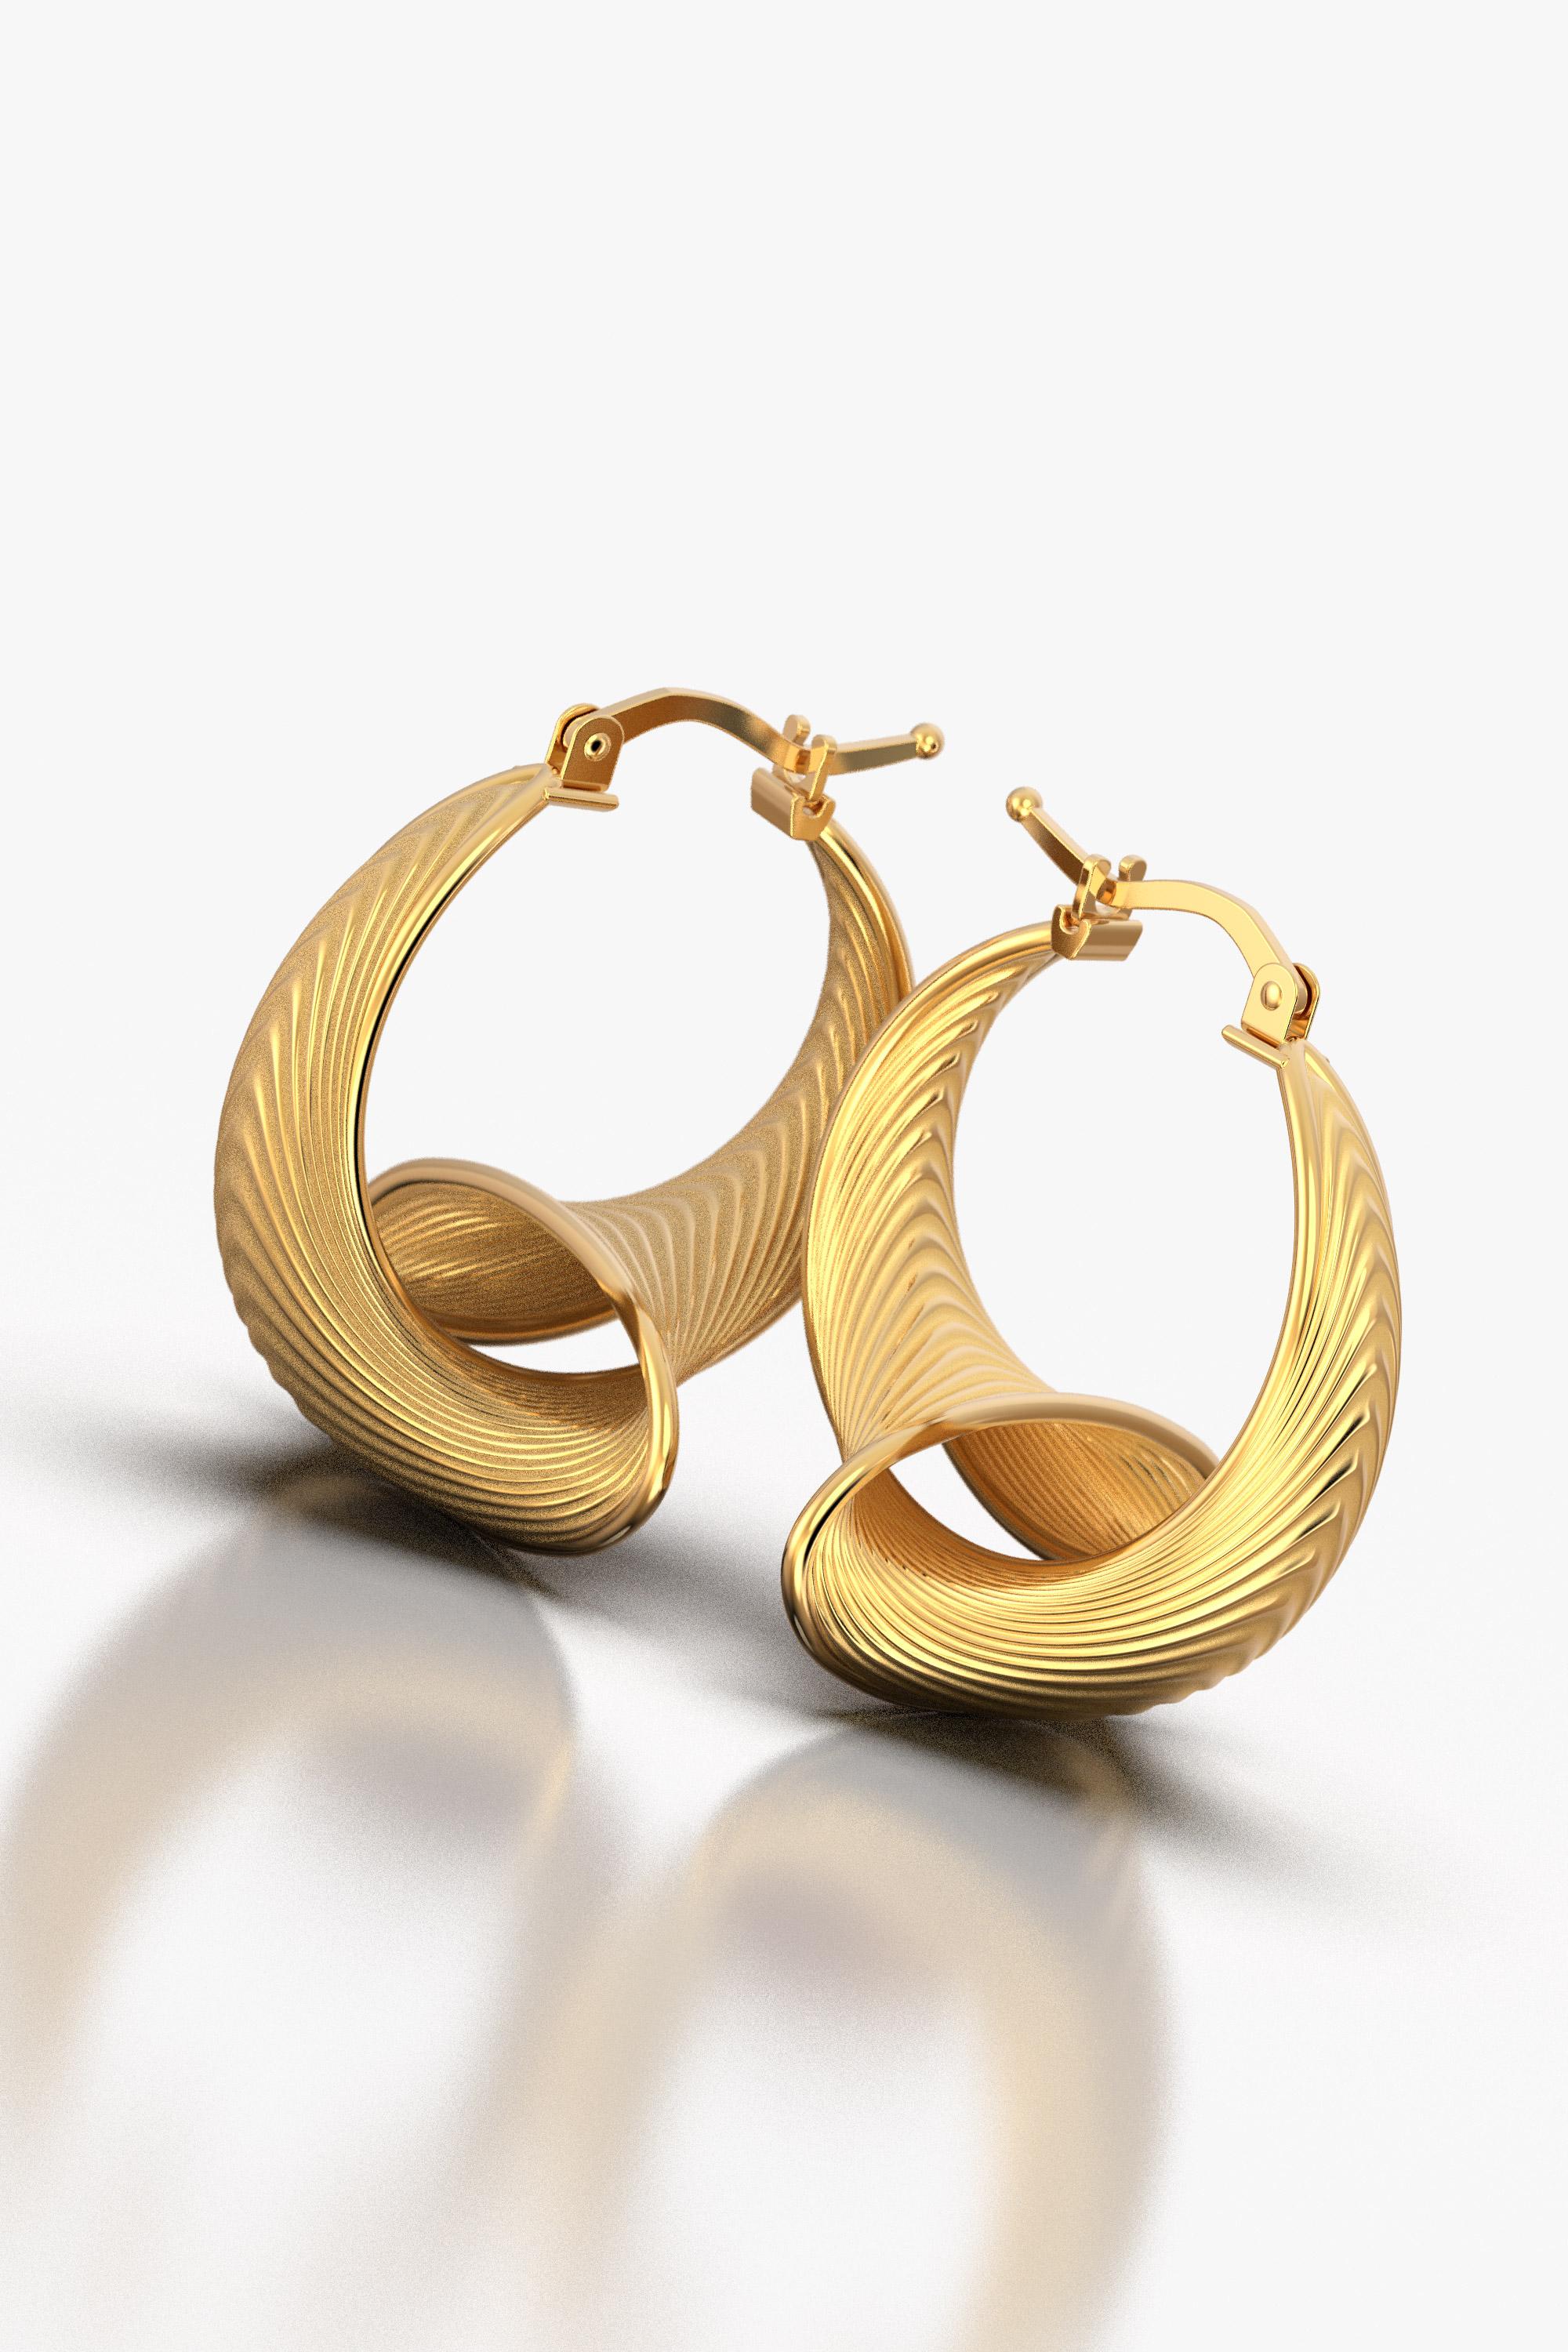 Modernist Stunning Hoop Earrings Only Made to Order 14k Gold, Made in Italy by Oltremare  For Sale